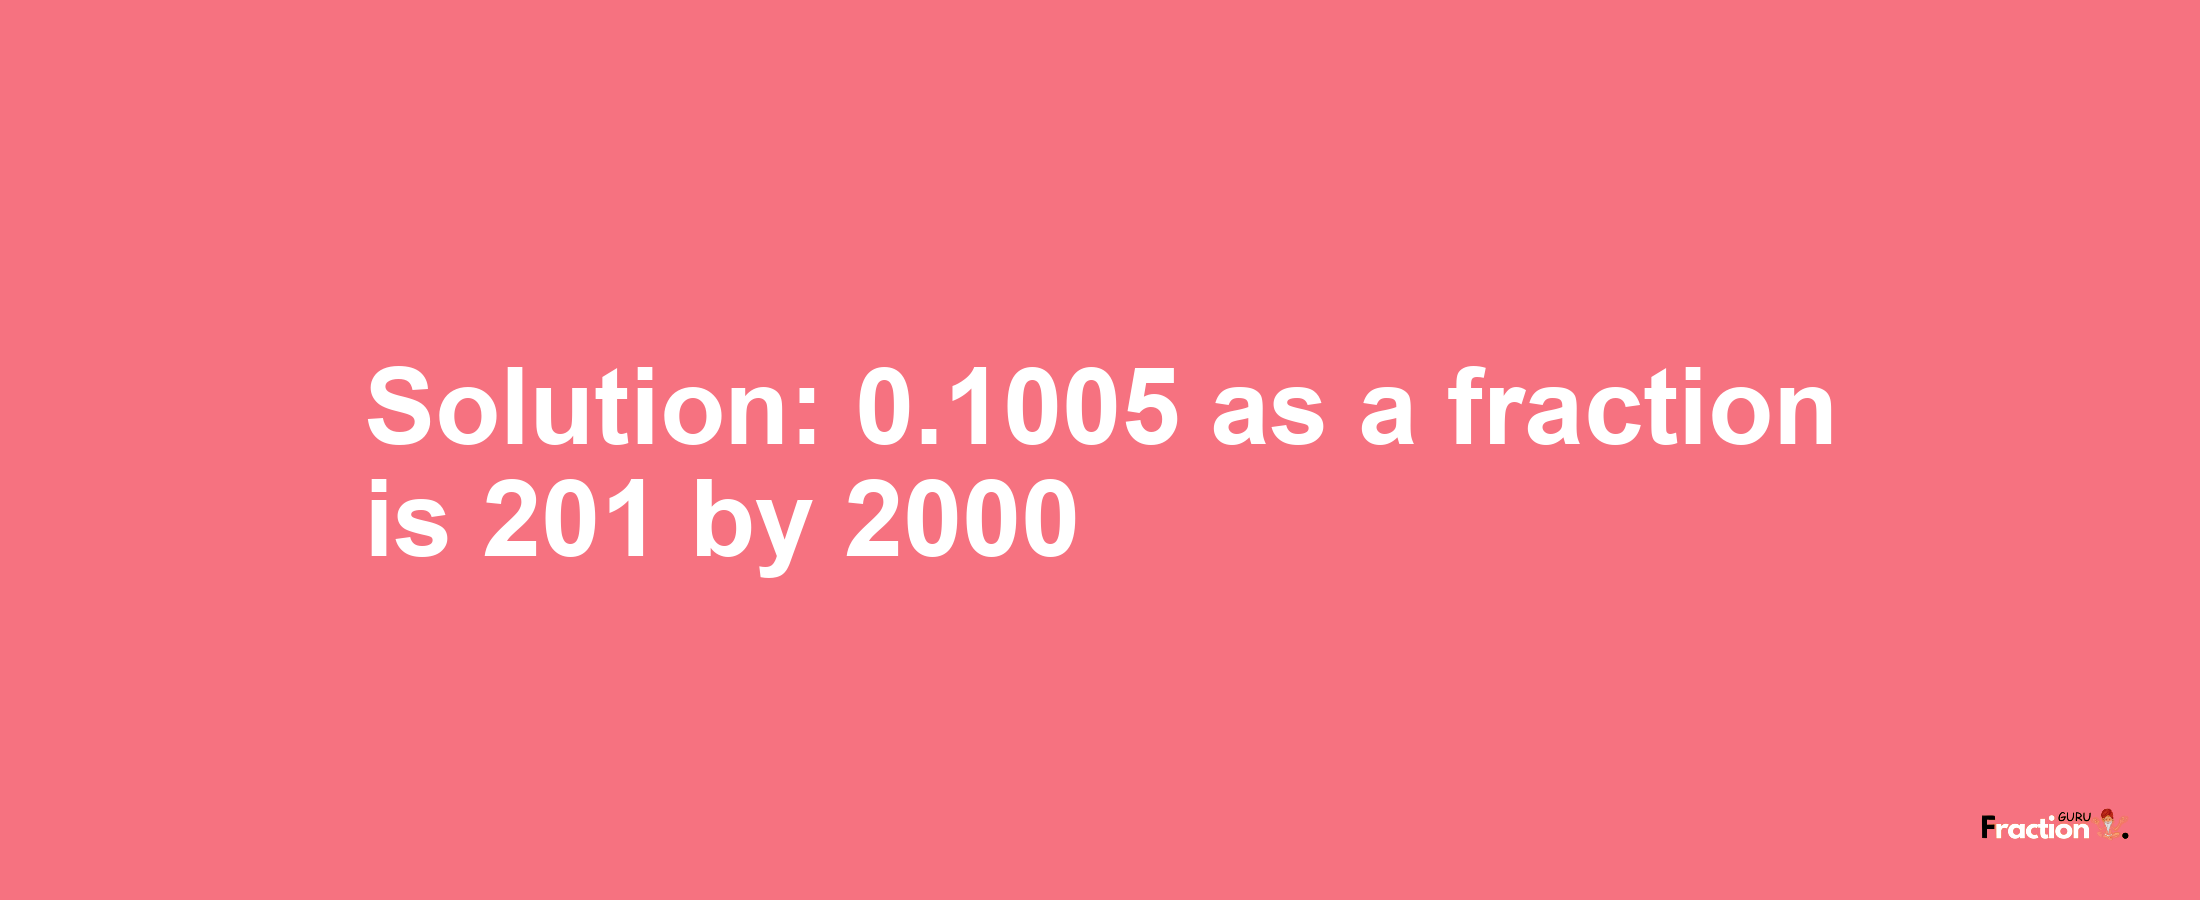 Solution:0.1005 as a fraction is 201/2000